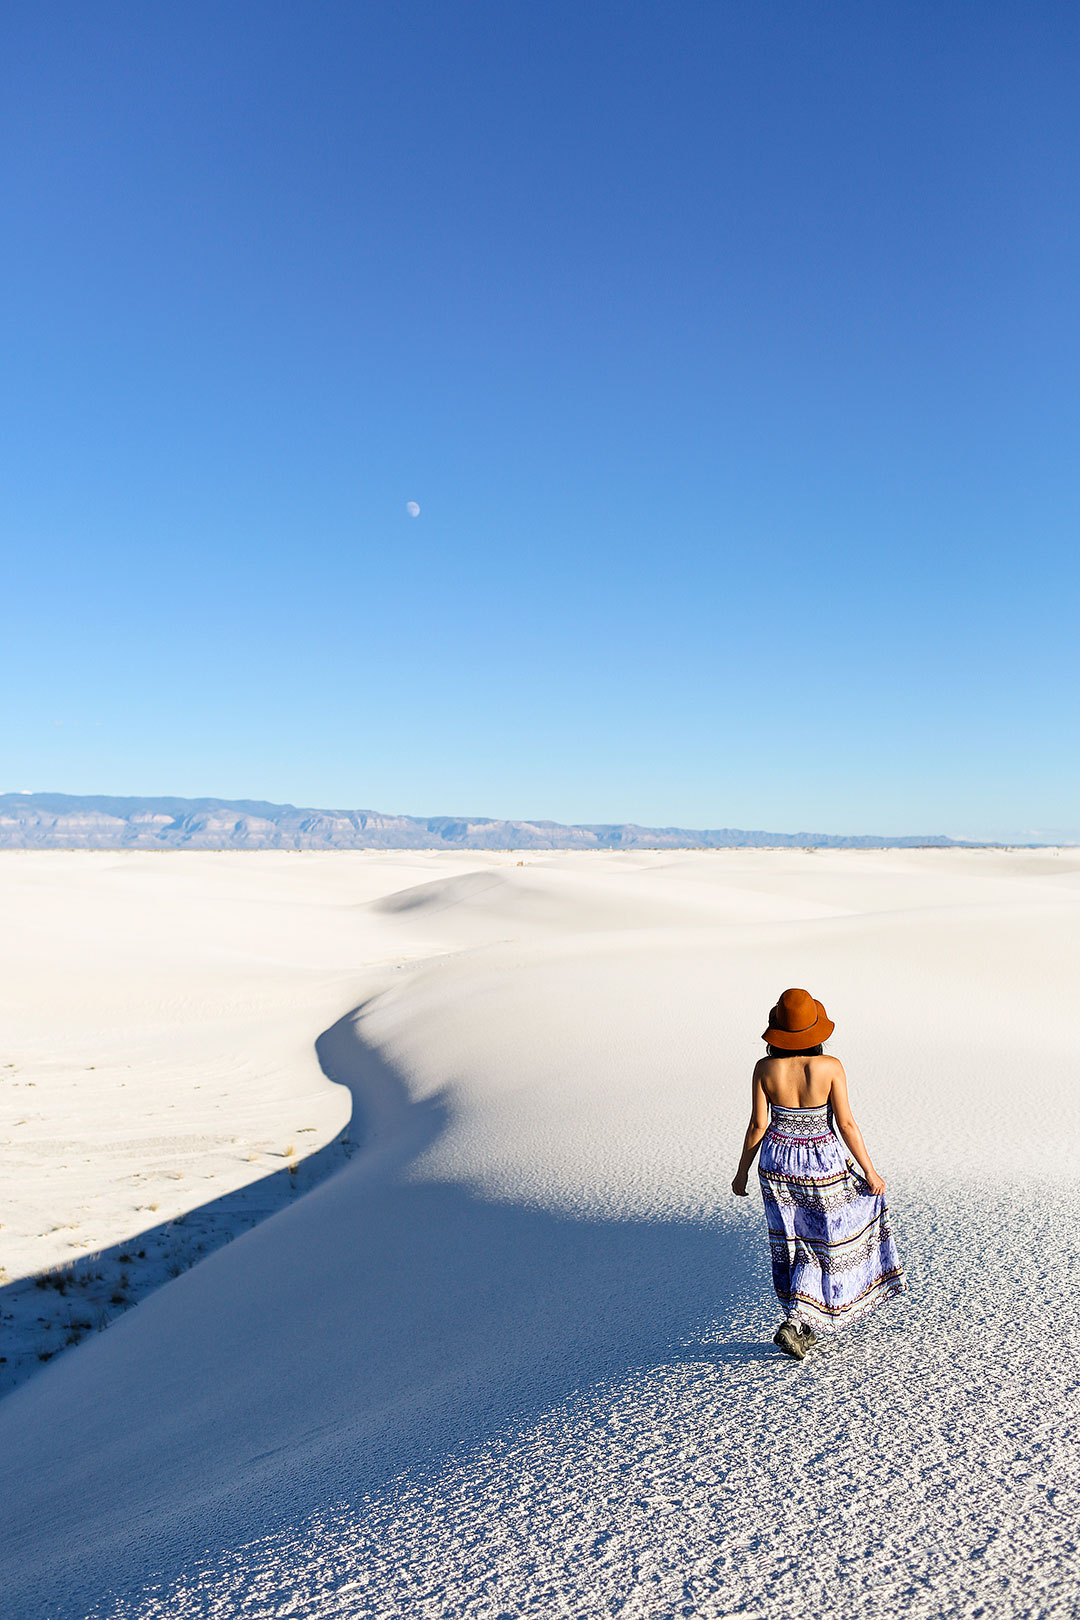 Popular White Sands in New Mexico